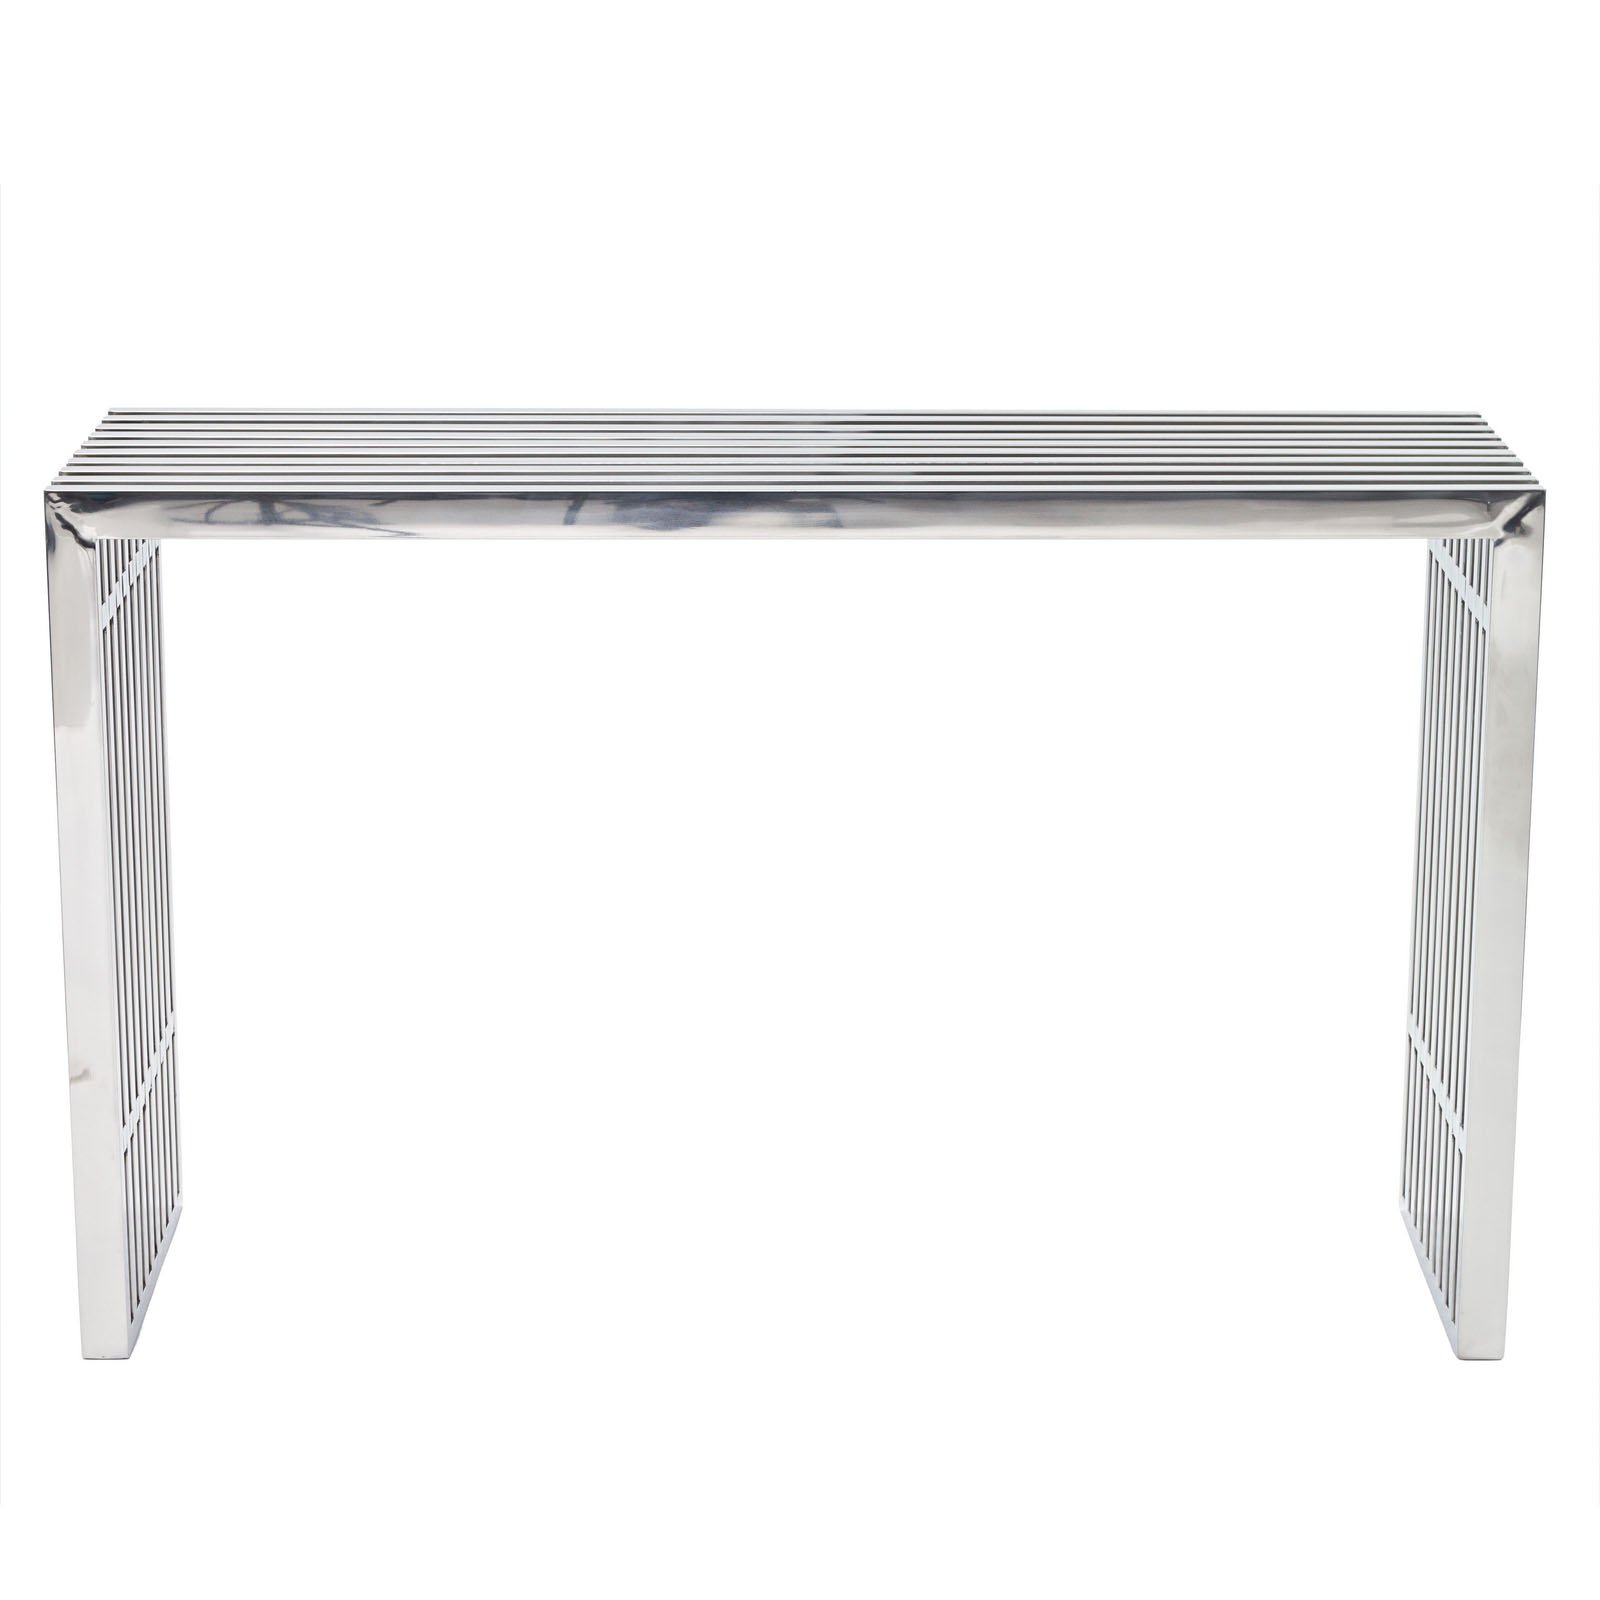 America Luxury - Tables Mod Tubular Stainless Steel console Table, Indoor Outdoor Use